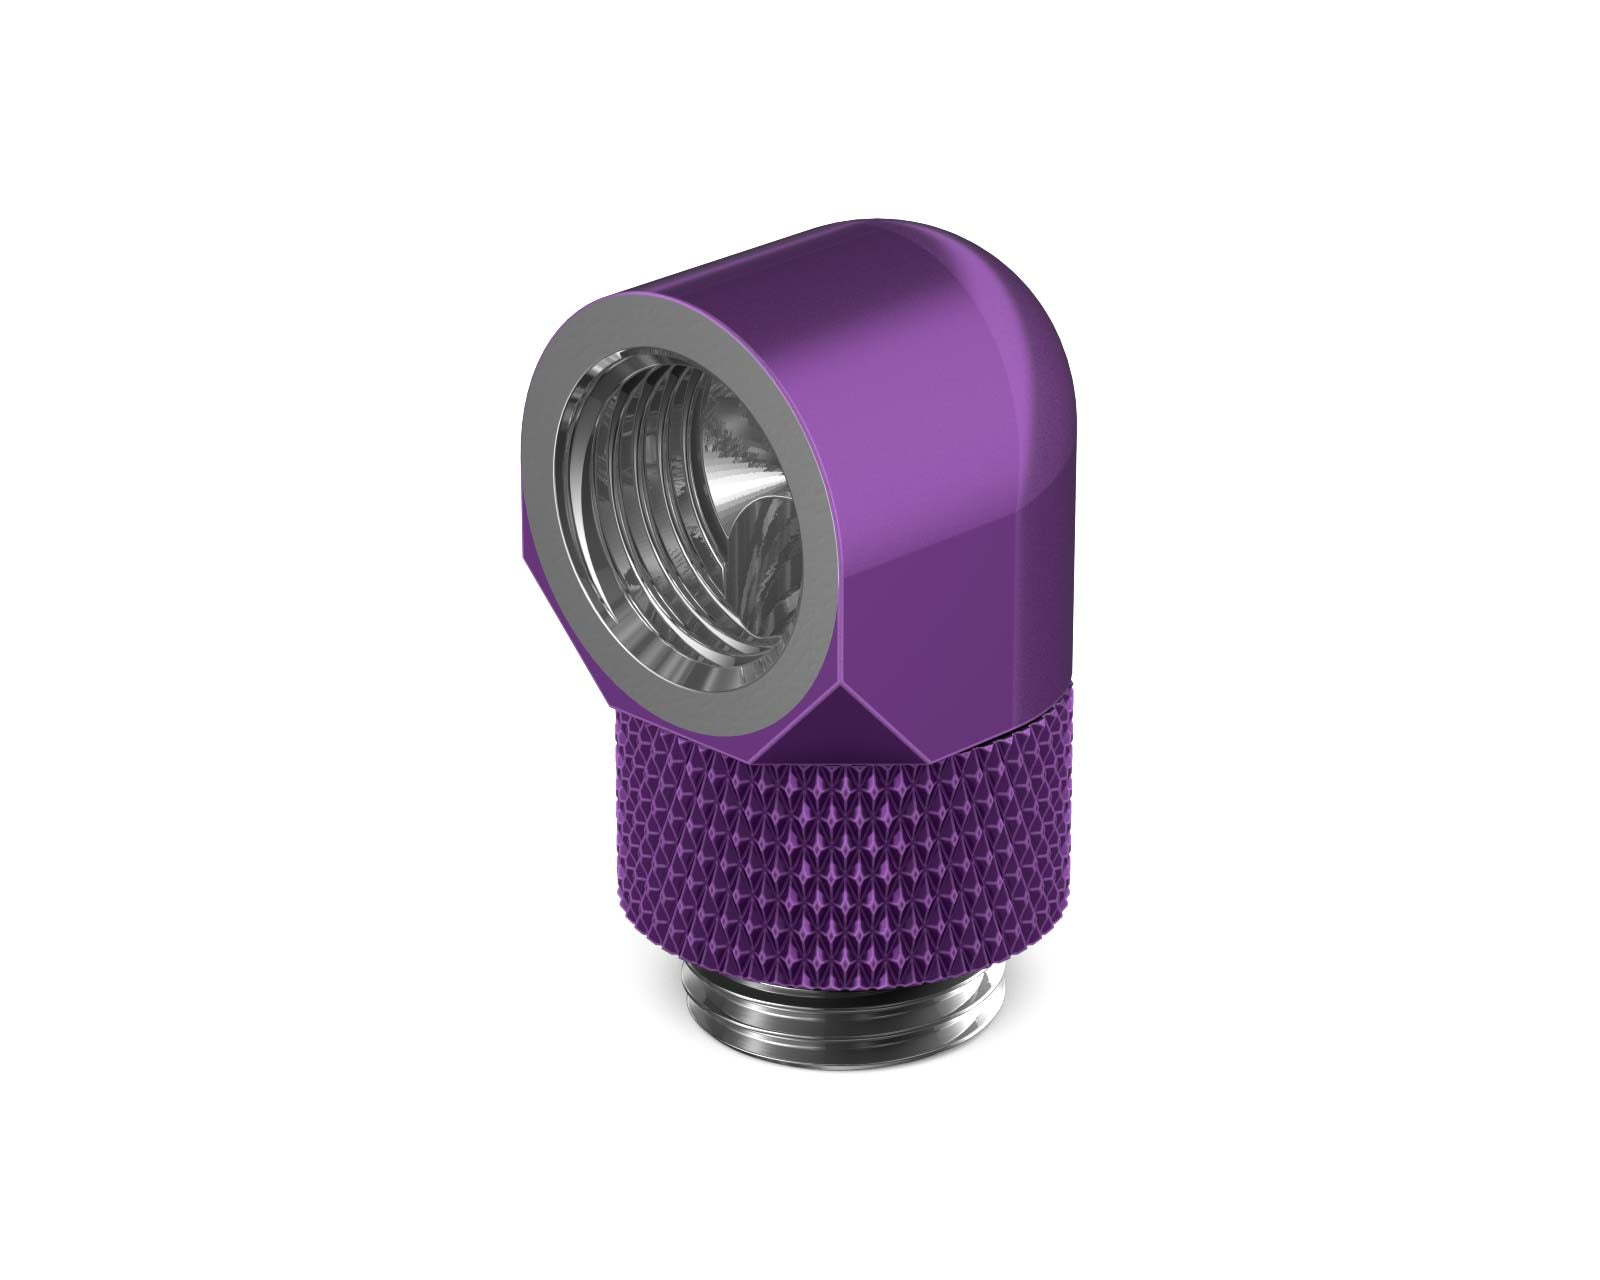 BSTOCK:PrimoChill Male to Female G 1/4in. 90 Degree SX Rotary Elbow Fitting - Candy Purple - PrimoChill - KEEPING IT COOL